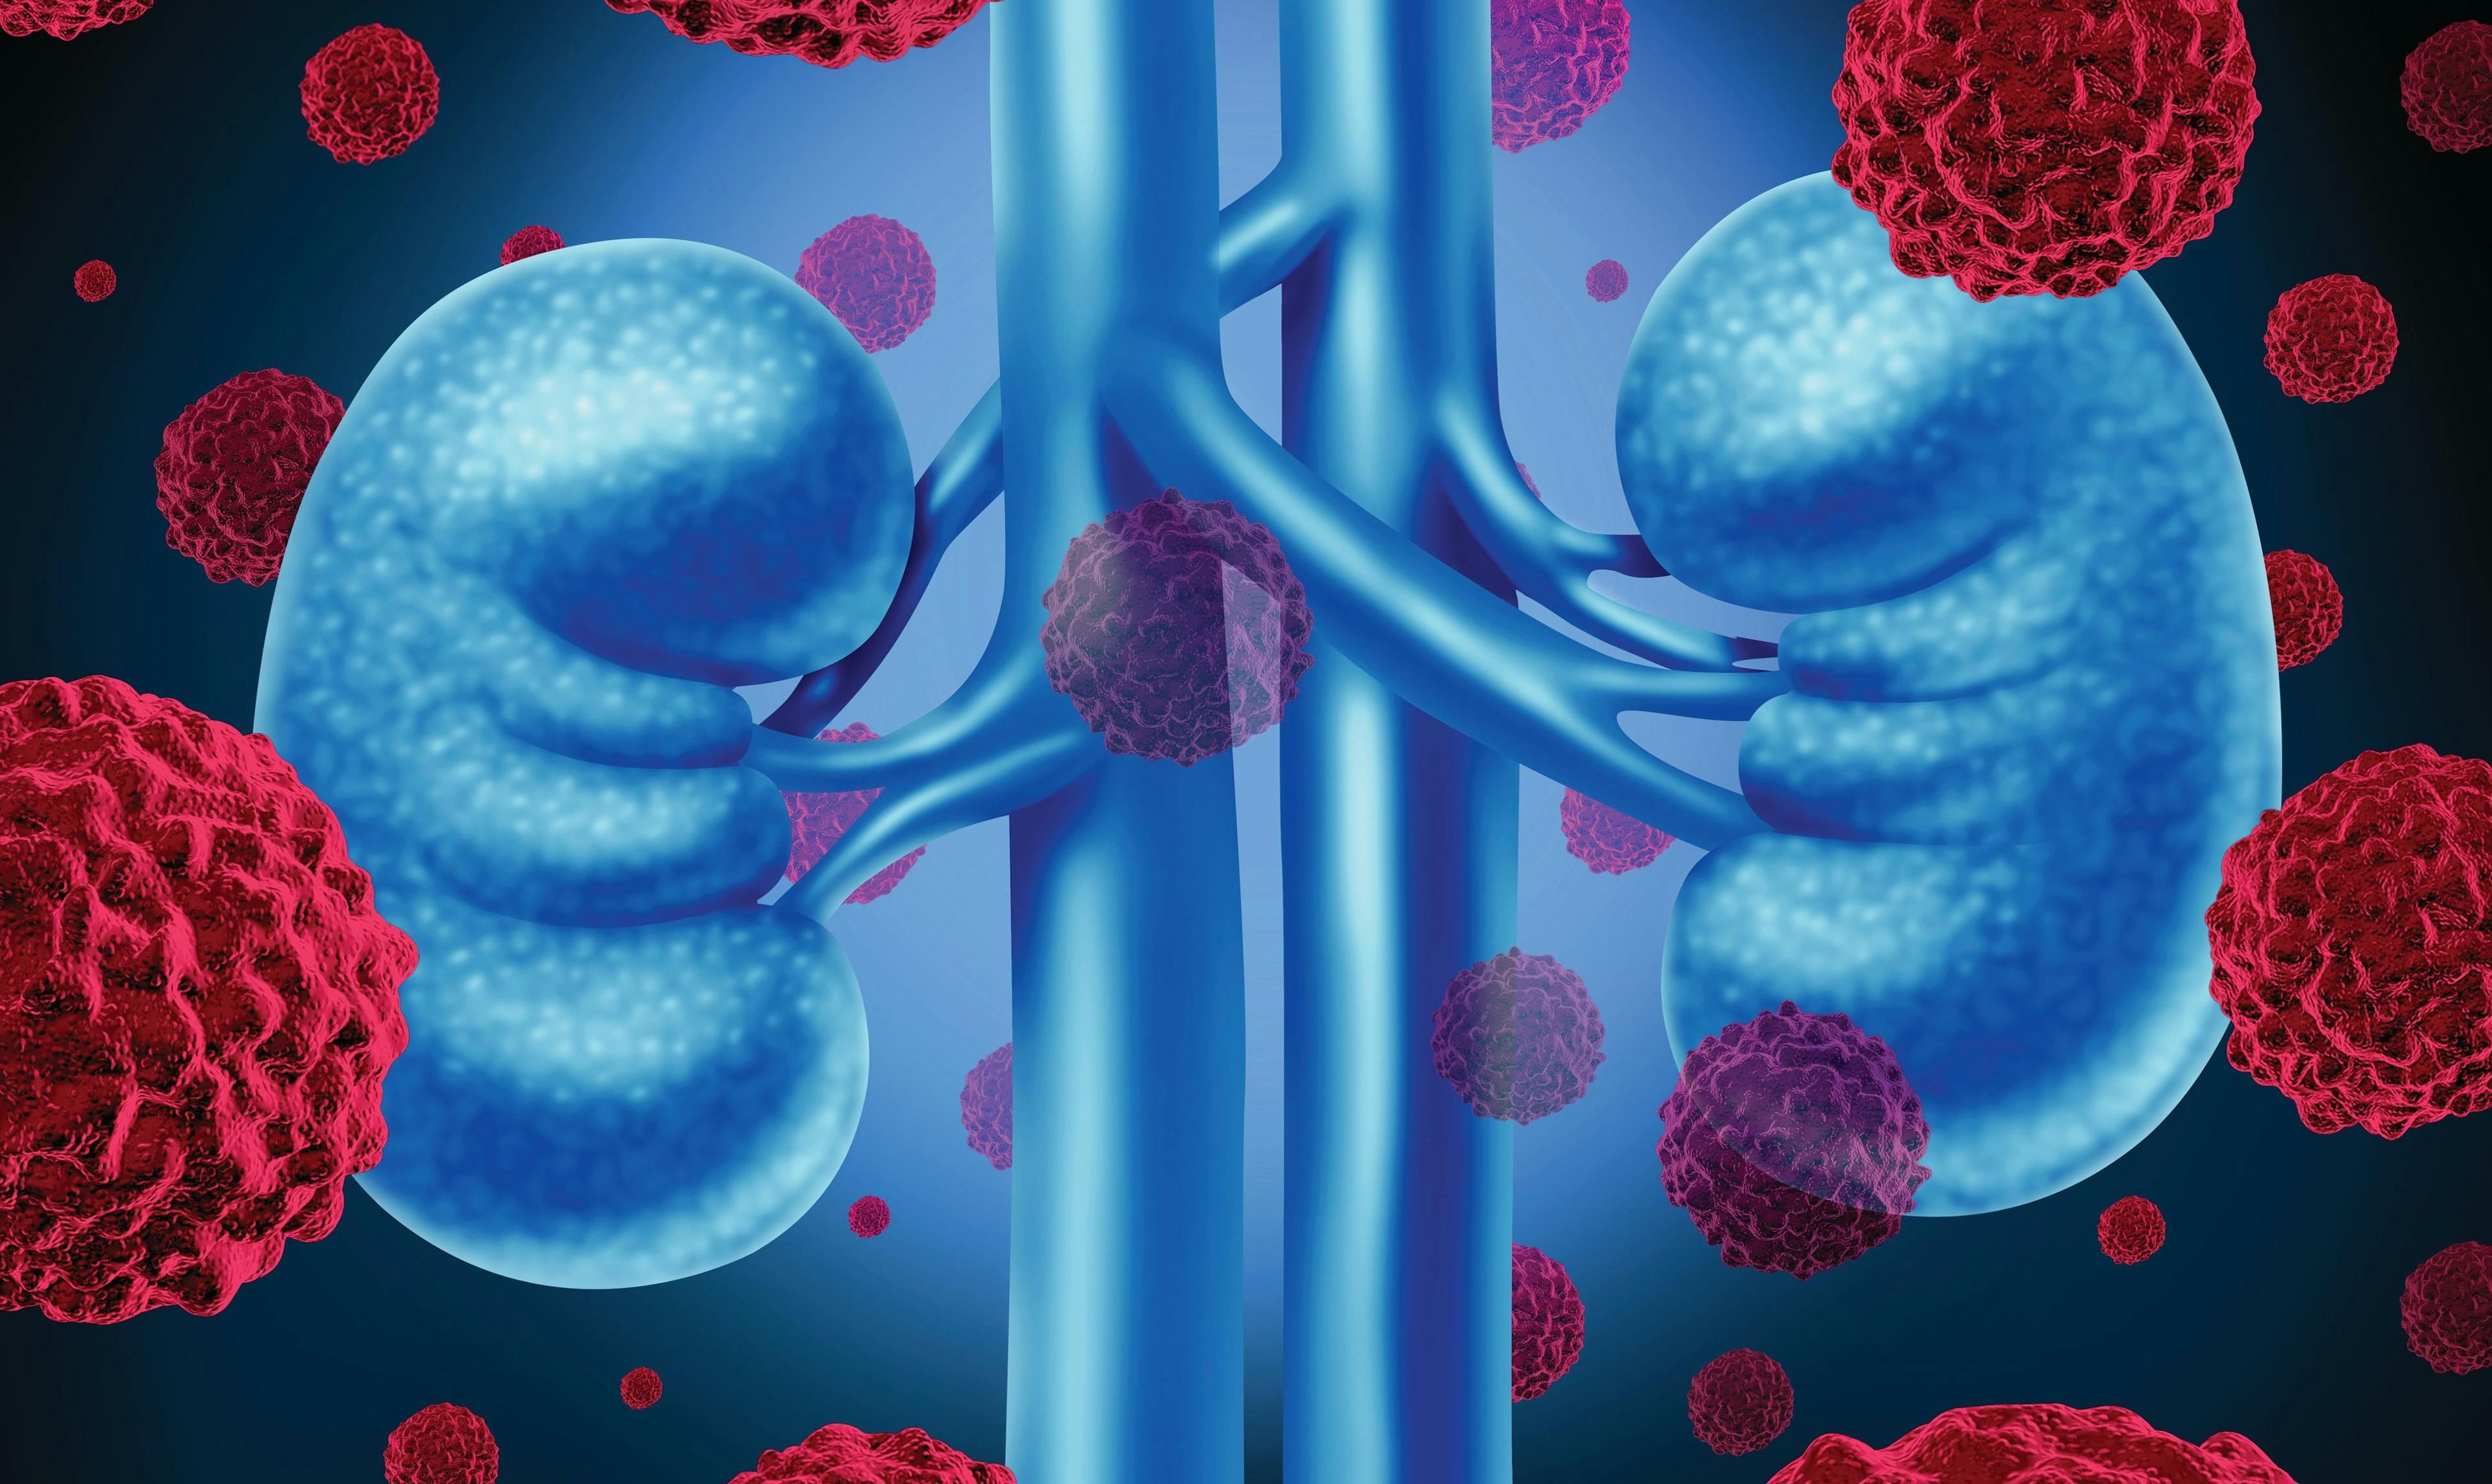 Weight Fluctuations Could Predict Negative Outcomes in Chronic Kidney Disease